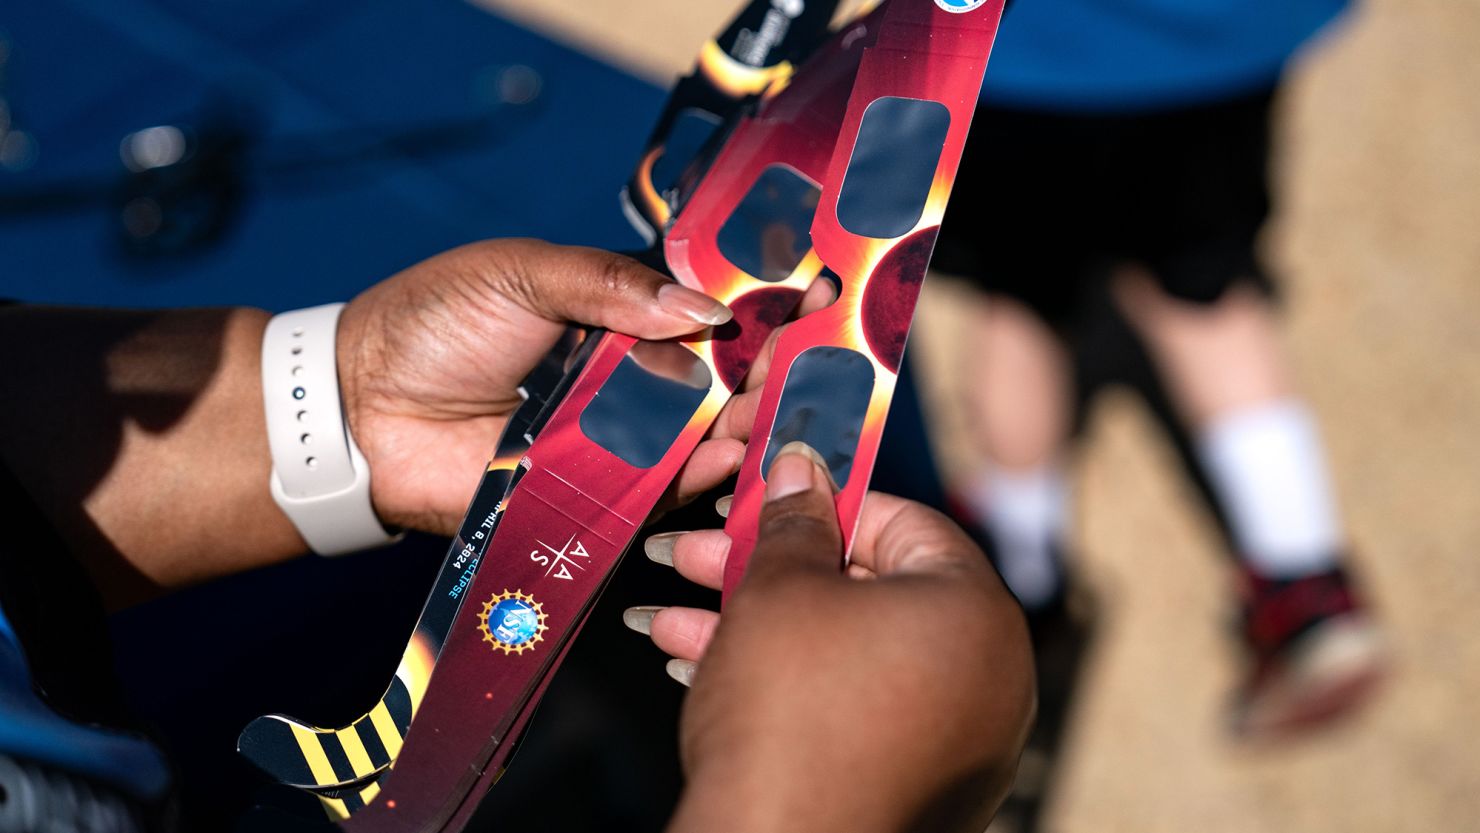 For those who experienced the solar eclipse on Monday, viewing glasses may be reusable if they meet the international safety standard.